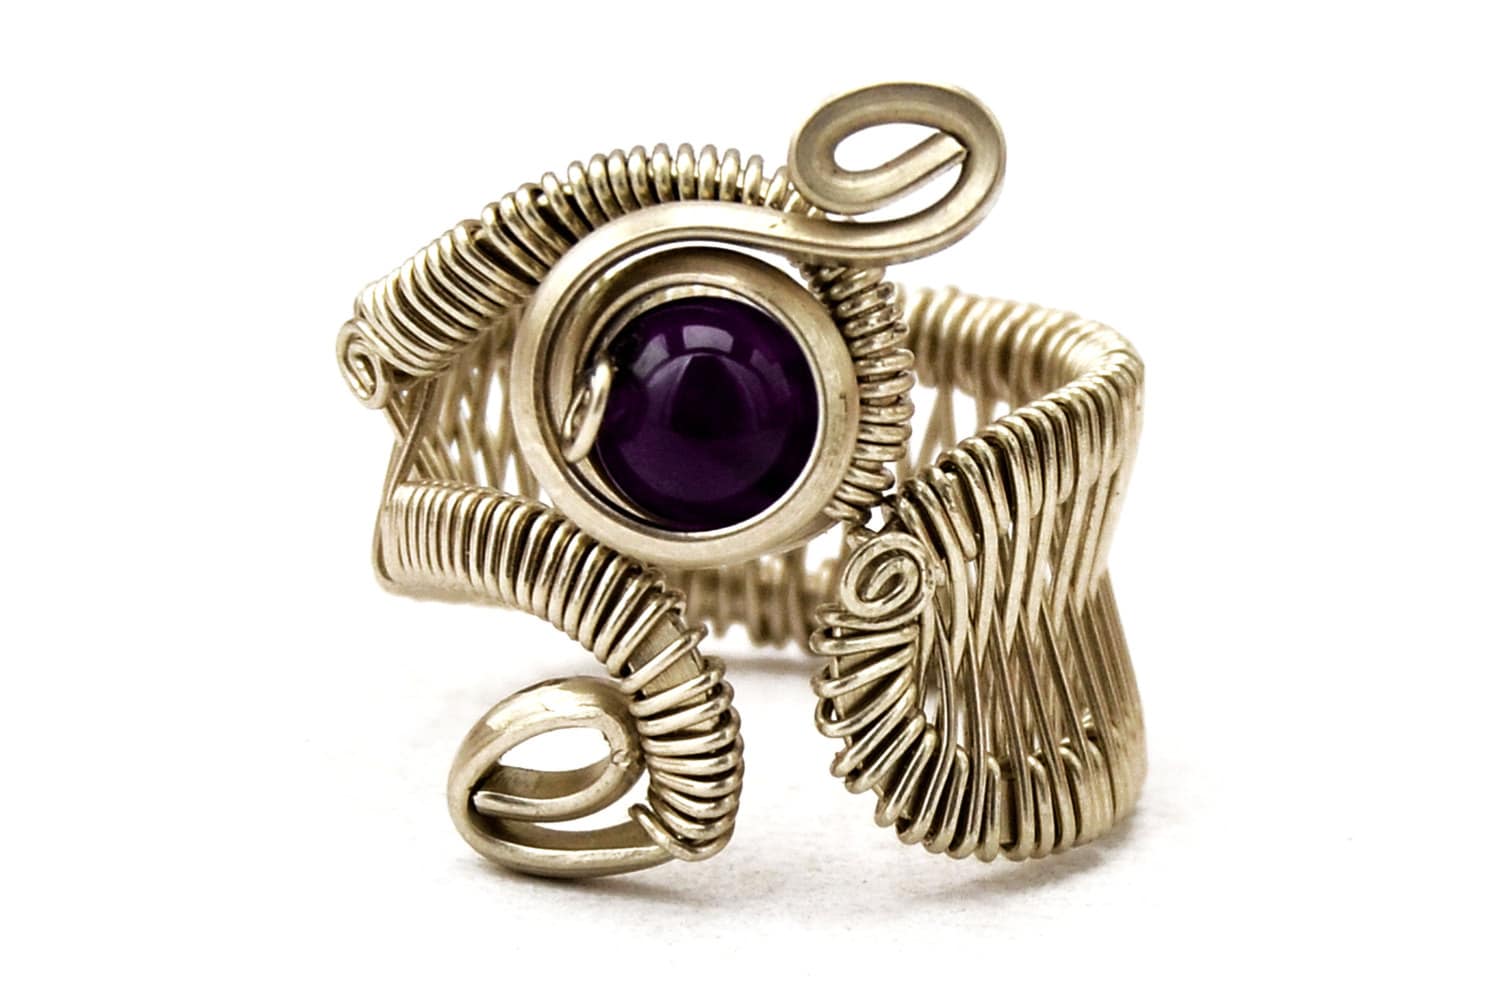 Amethyst Ring Steampunk Ring Wire Wrapped Ring Gemstone Ring Purple Stone Ring Boho Ring Cocktail Ring Band Ring Wire Work Ring Open Ring